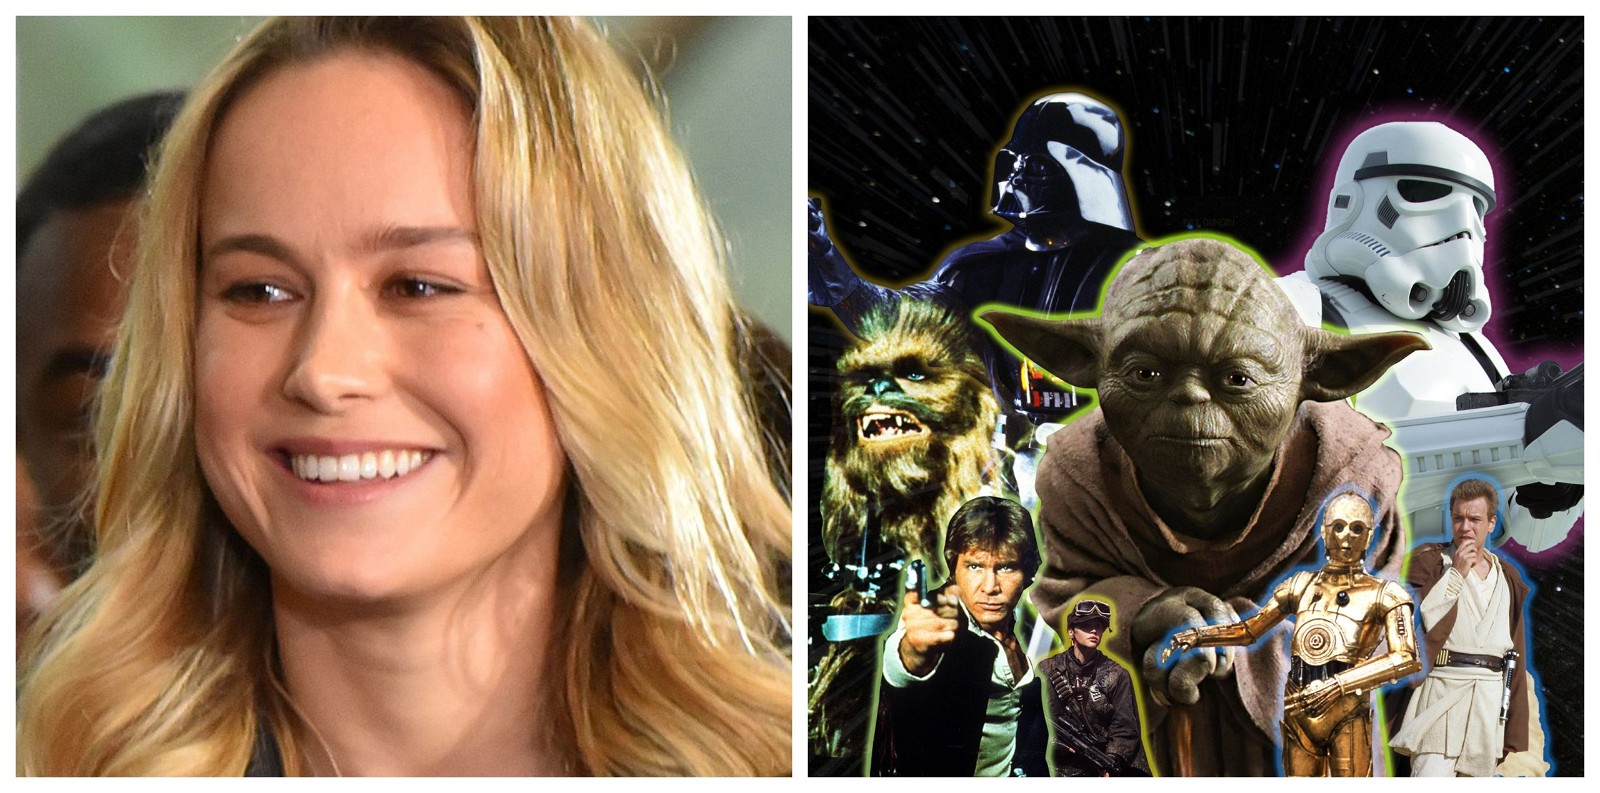 Brie Larson could have almost become a new Jedi in the Star Wars franchise